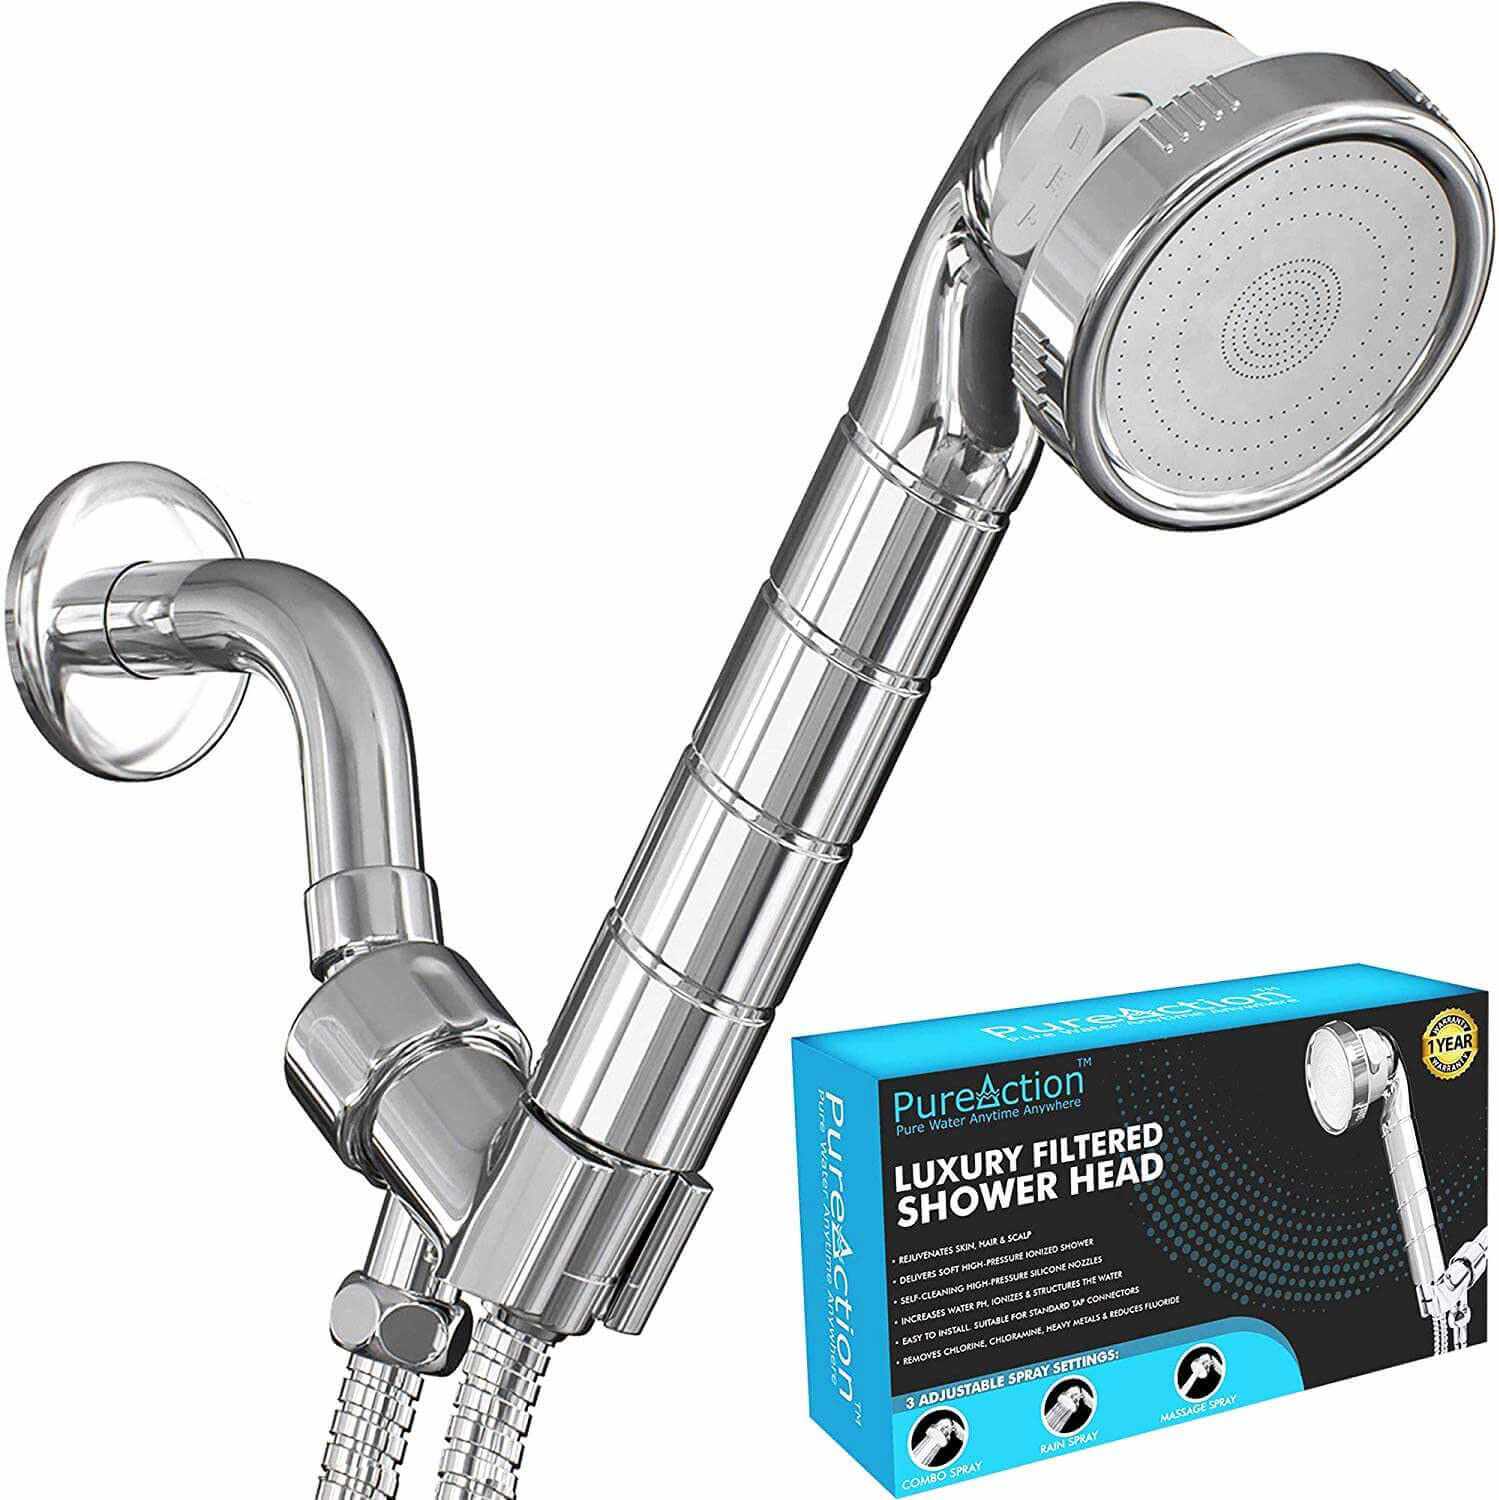 High-Pressure Showerhead Best Filters Chlorine & Fluoride Details about   Filtered Shower Head 